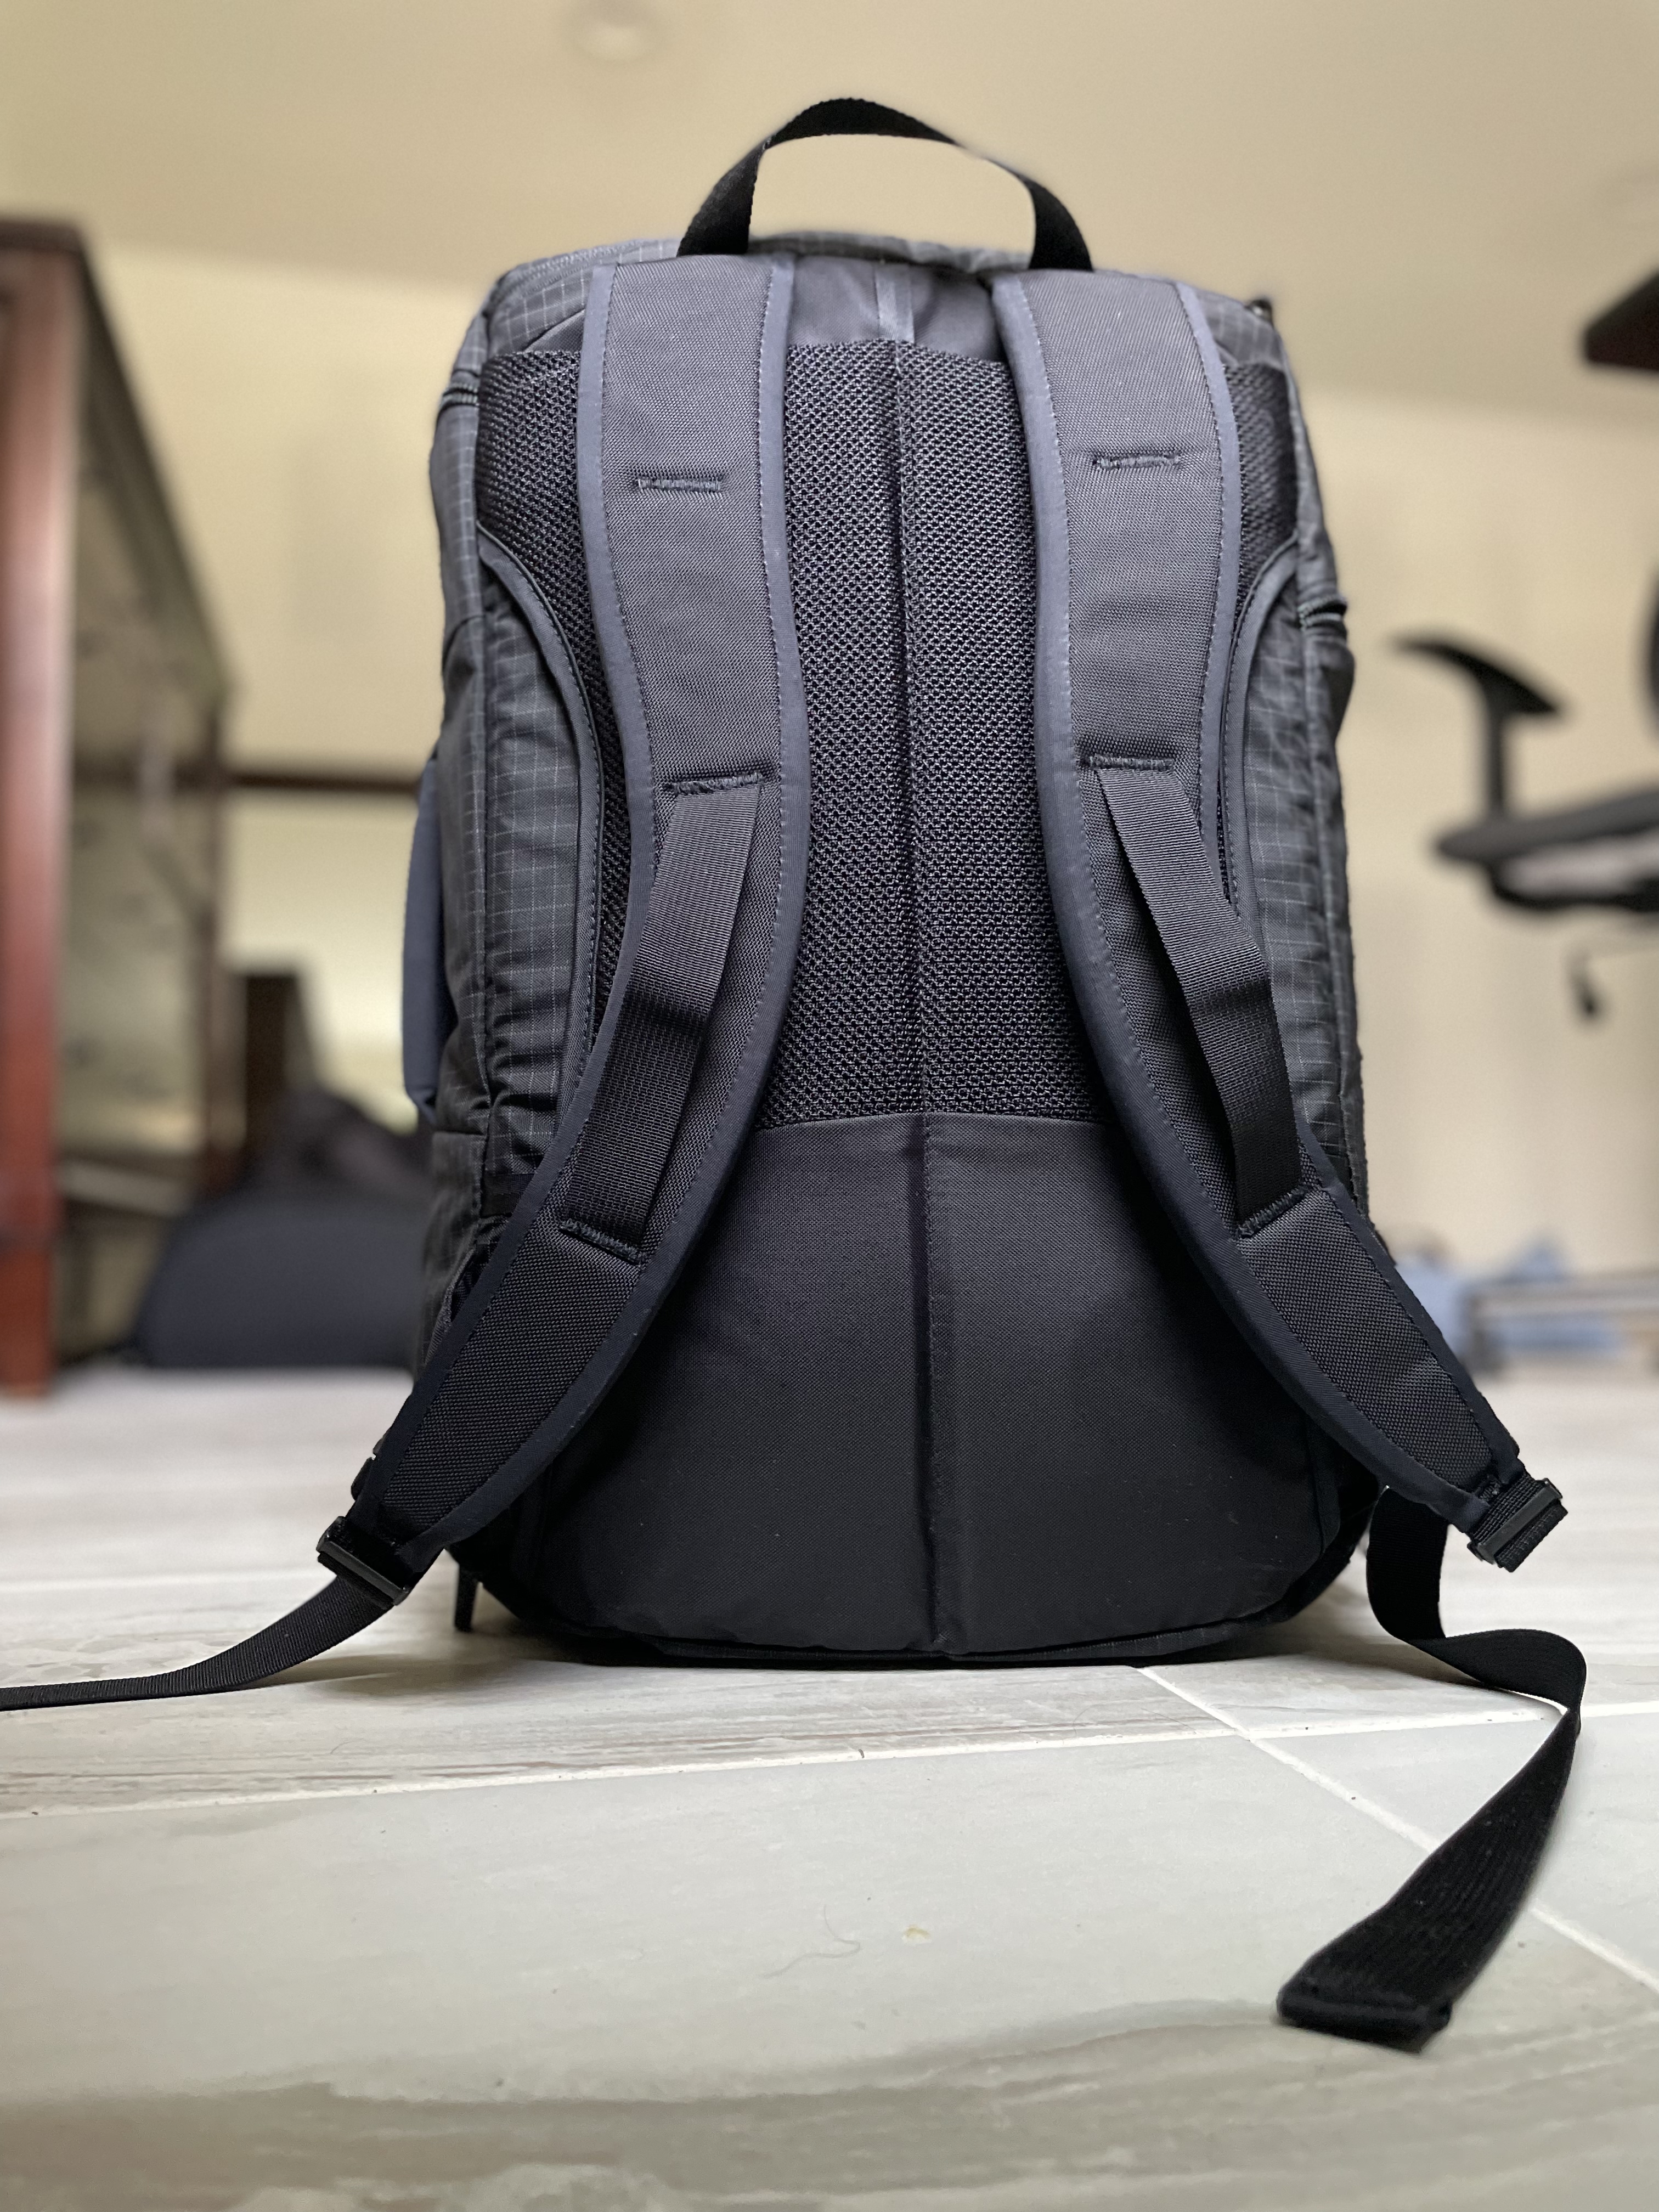 Tom Bihn Techonaut 30 Review - impressions, packing, comparison with ...